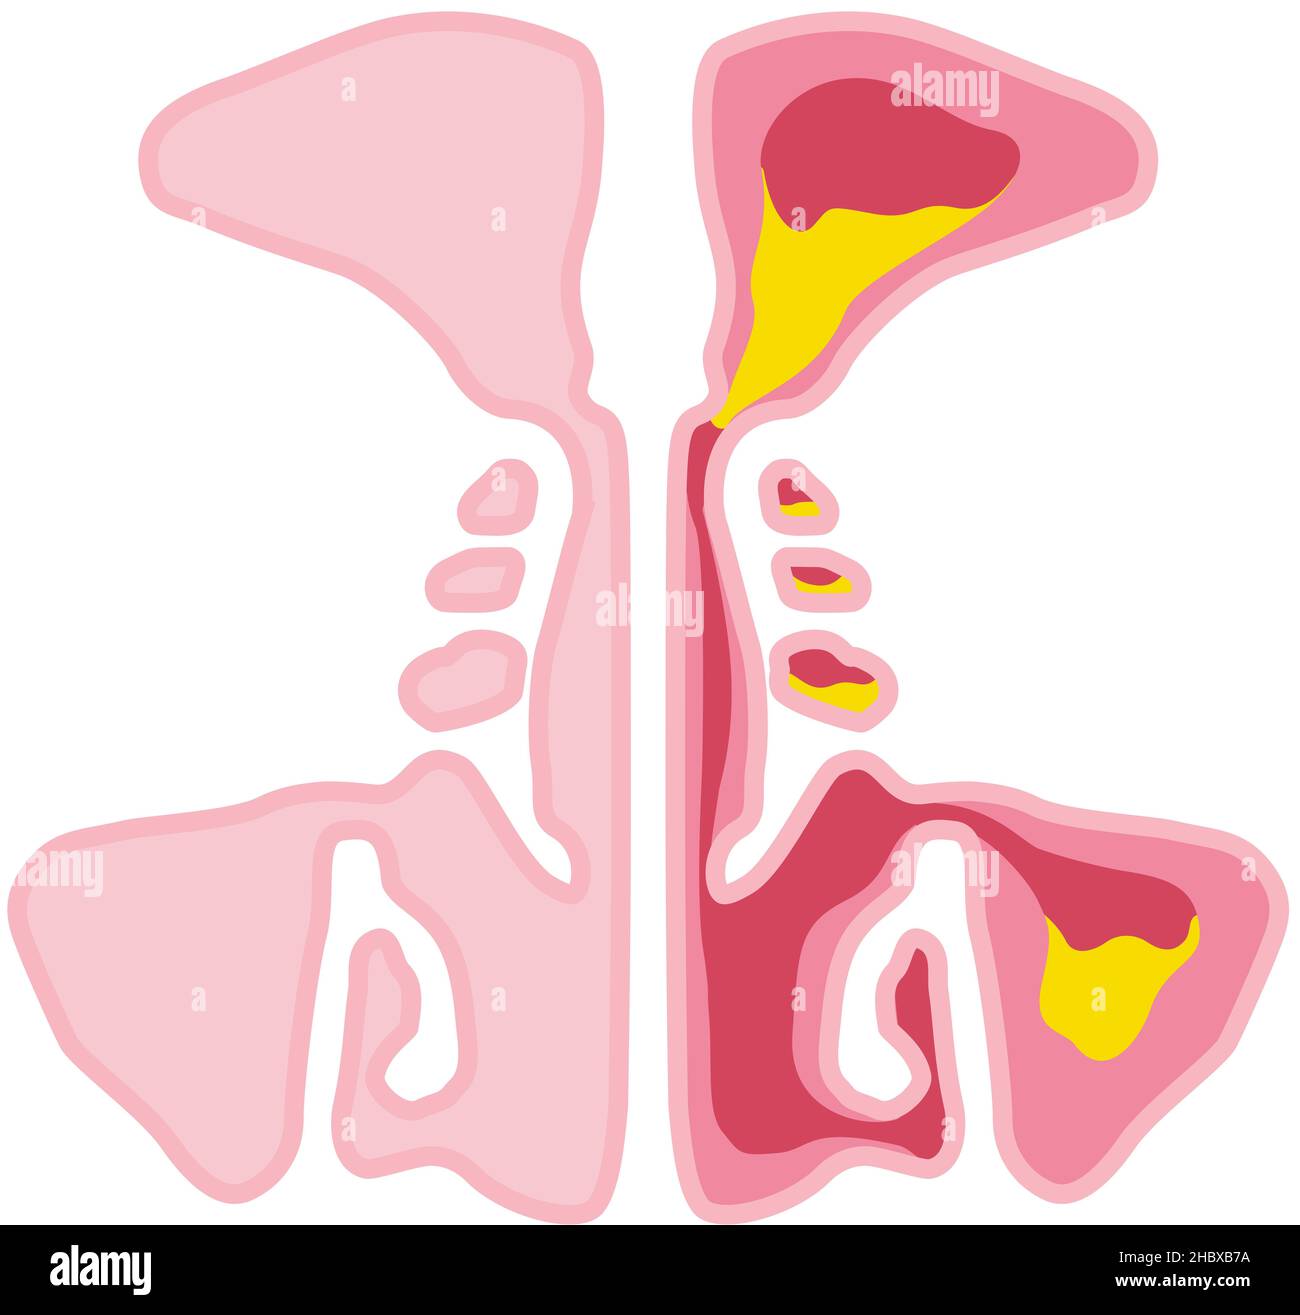 Vector illustration showing healthy sinus and sinusitis with inflamed lining, obstructed sinus opening, adenoid and excess mucus Stock Photo